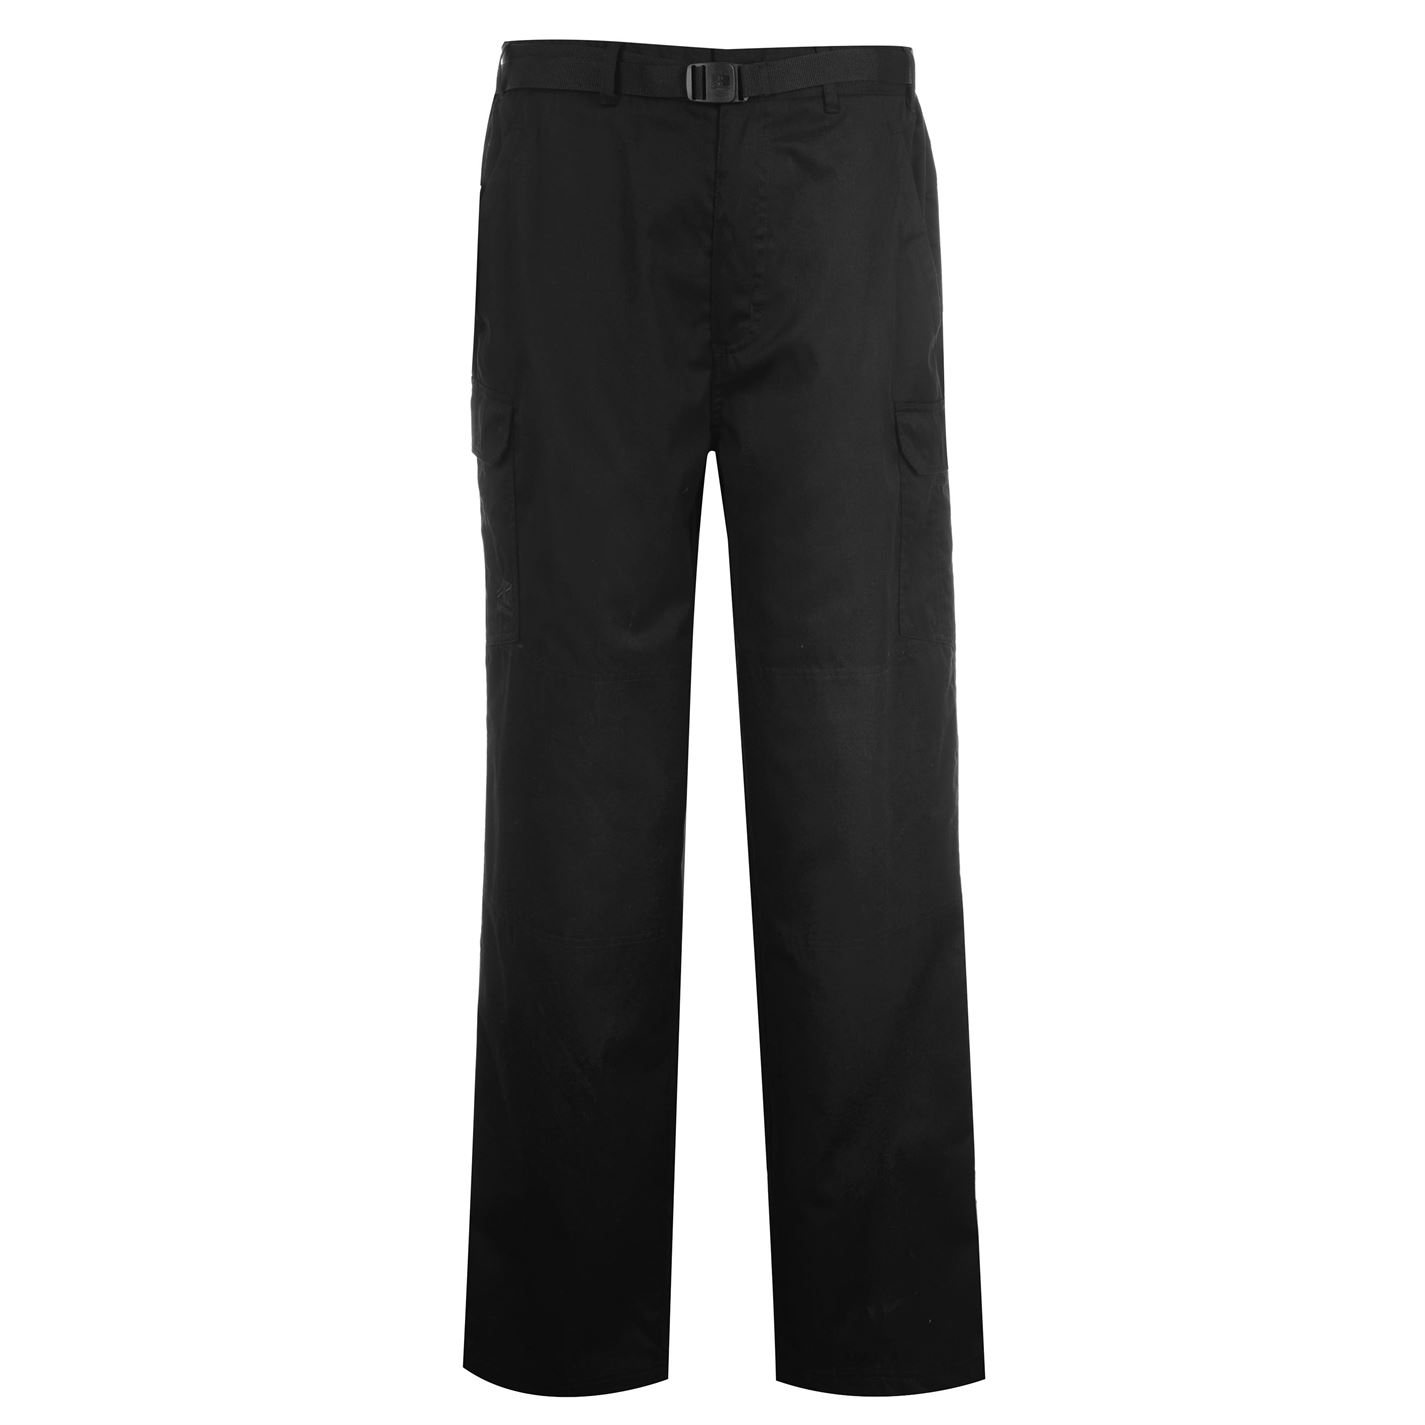 Karrimor Mens Munro Trousers Breathable Front And Back Pockets Casual ...